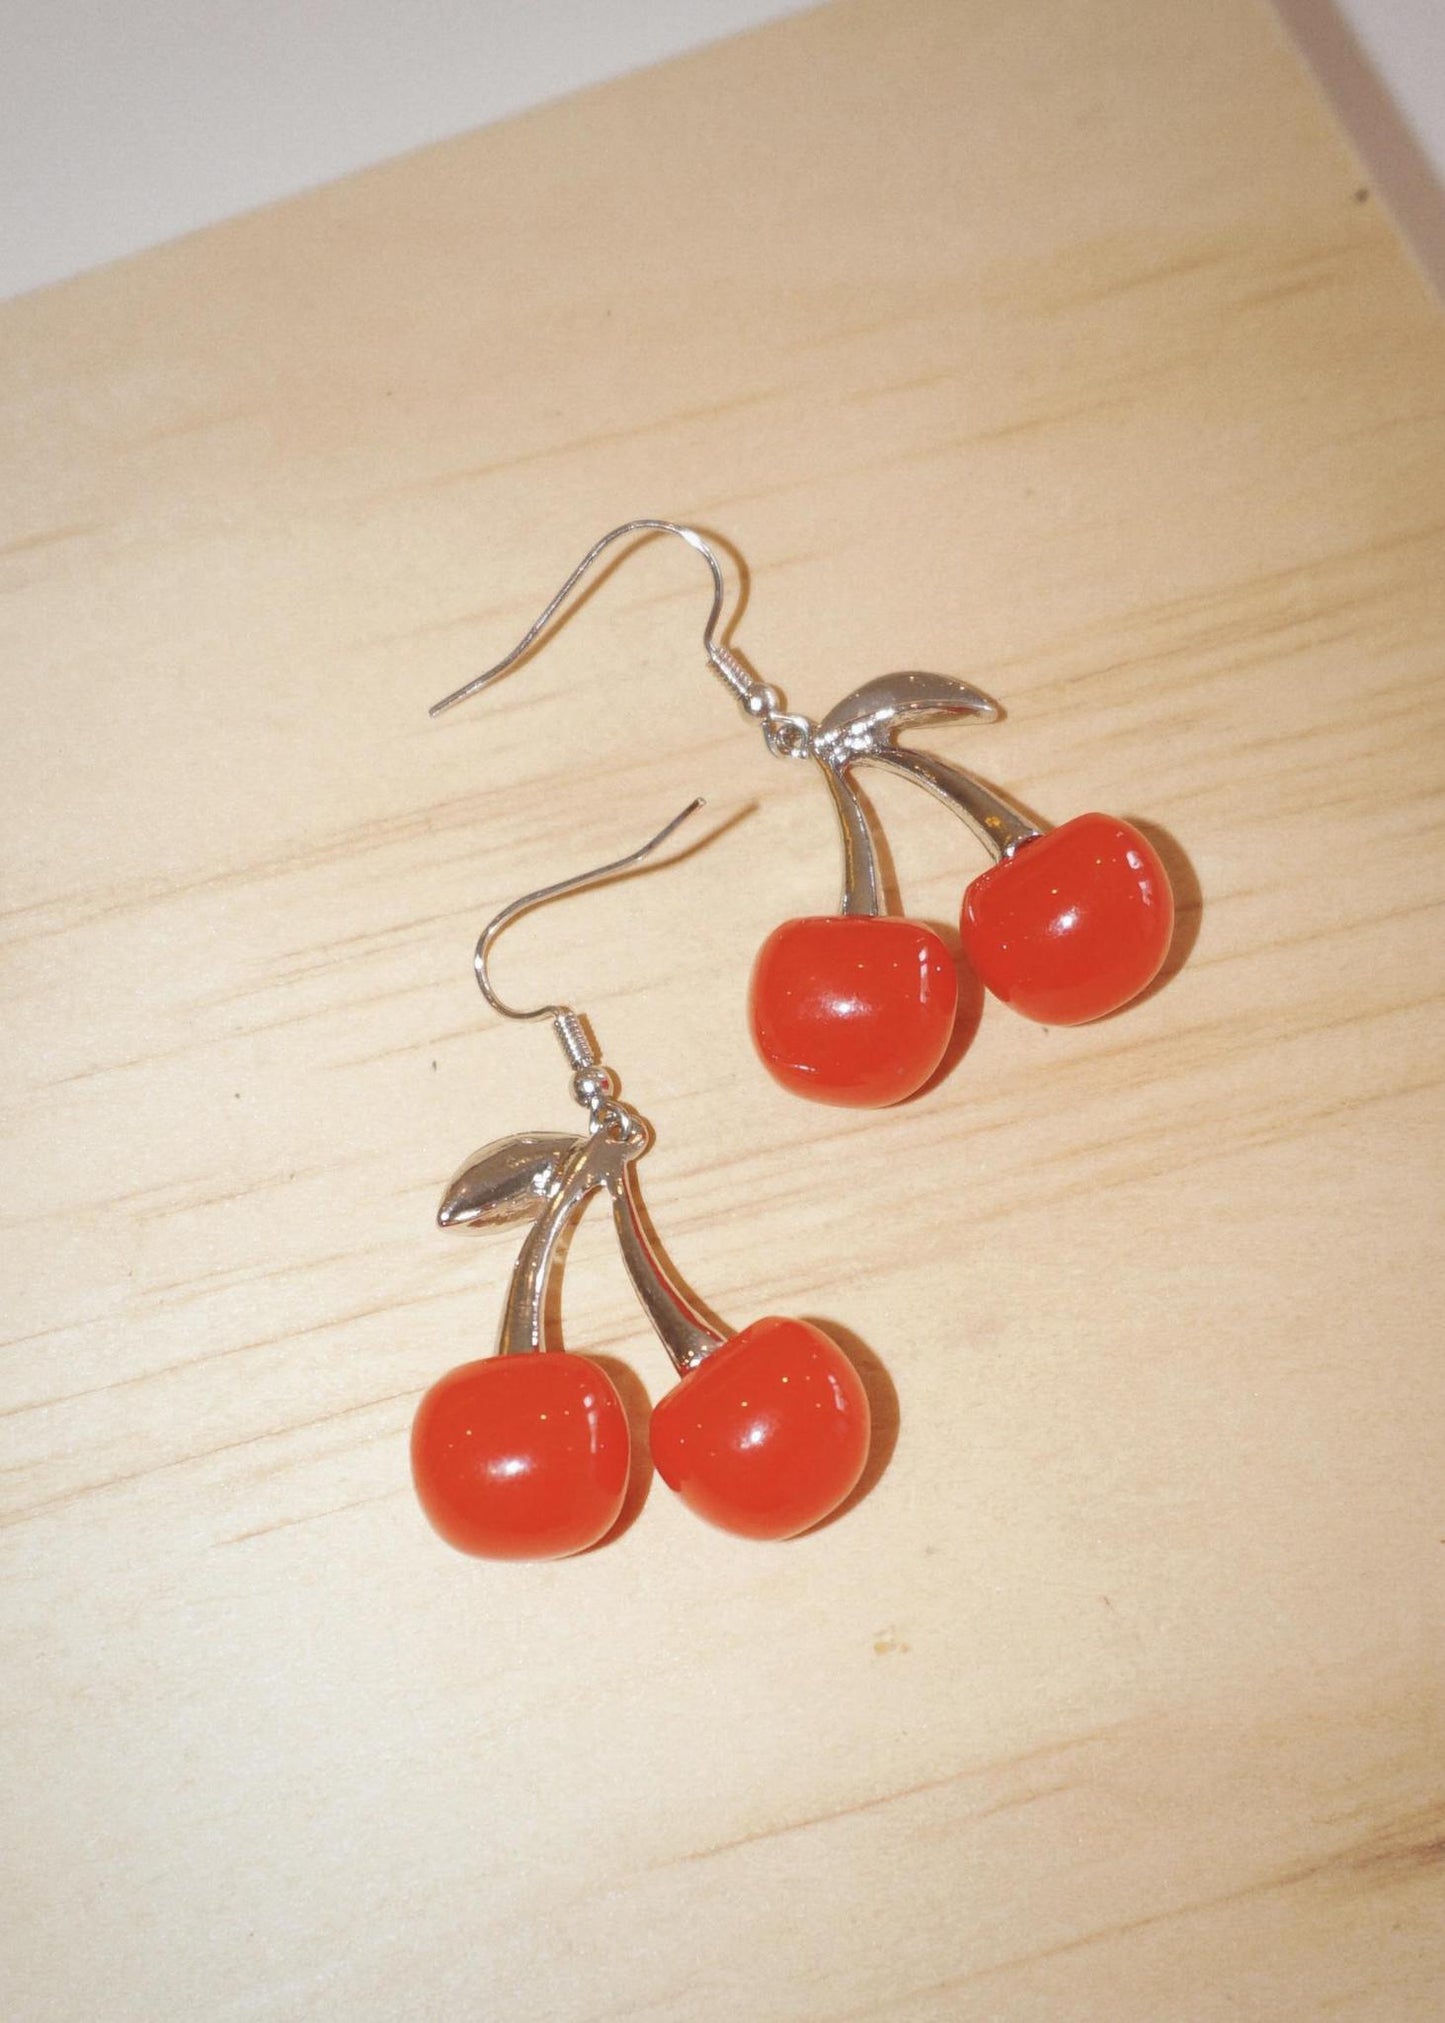 Red Cherry Earrings with Silver Finish